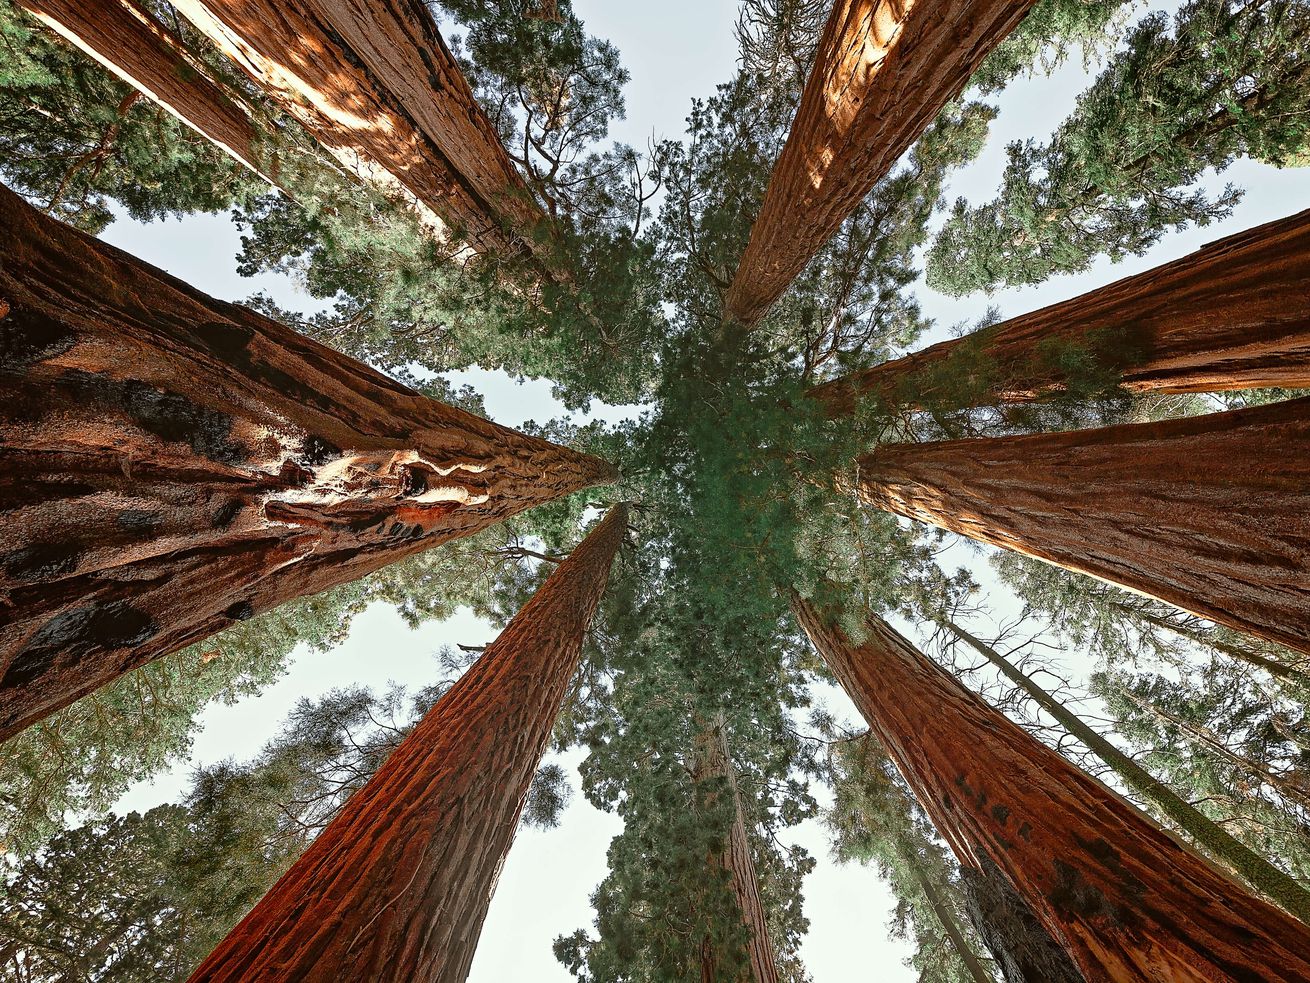 A view of giant trees shot looking straight up.